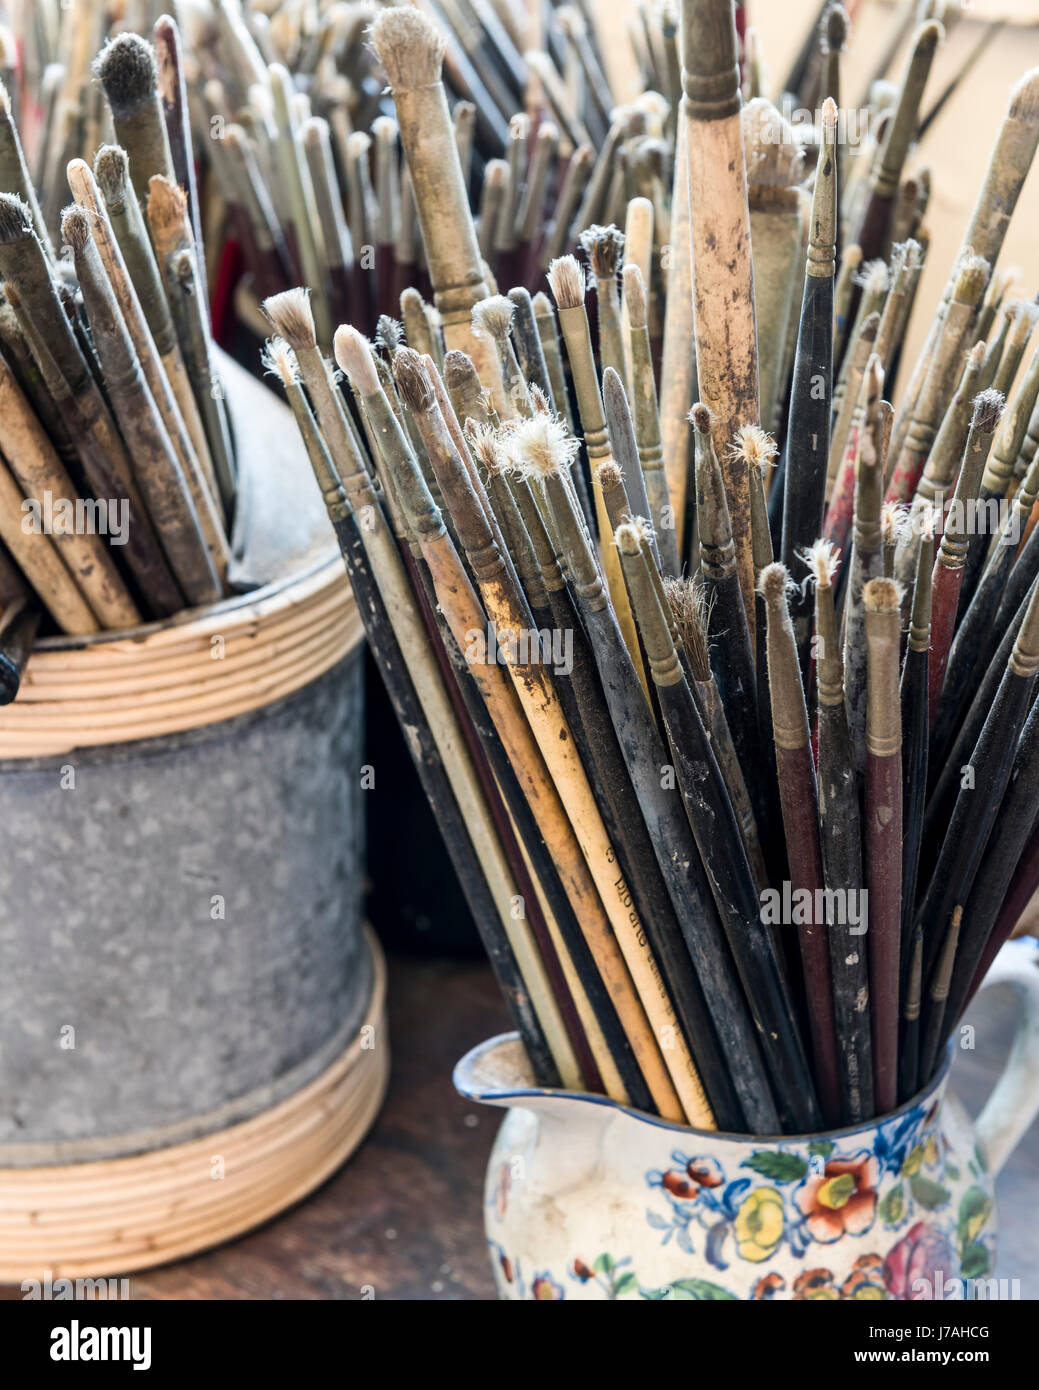 Artists paint brushes stored in jars Stock Photo